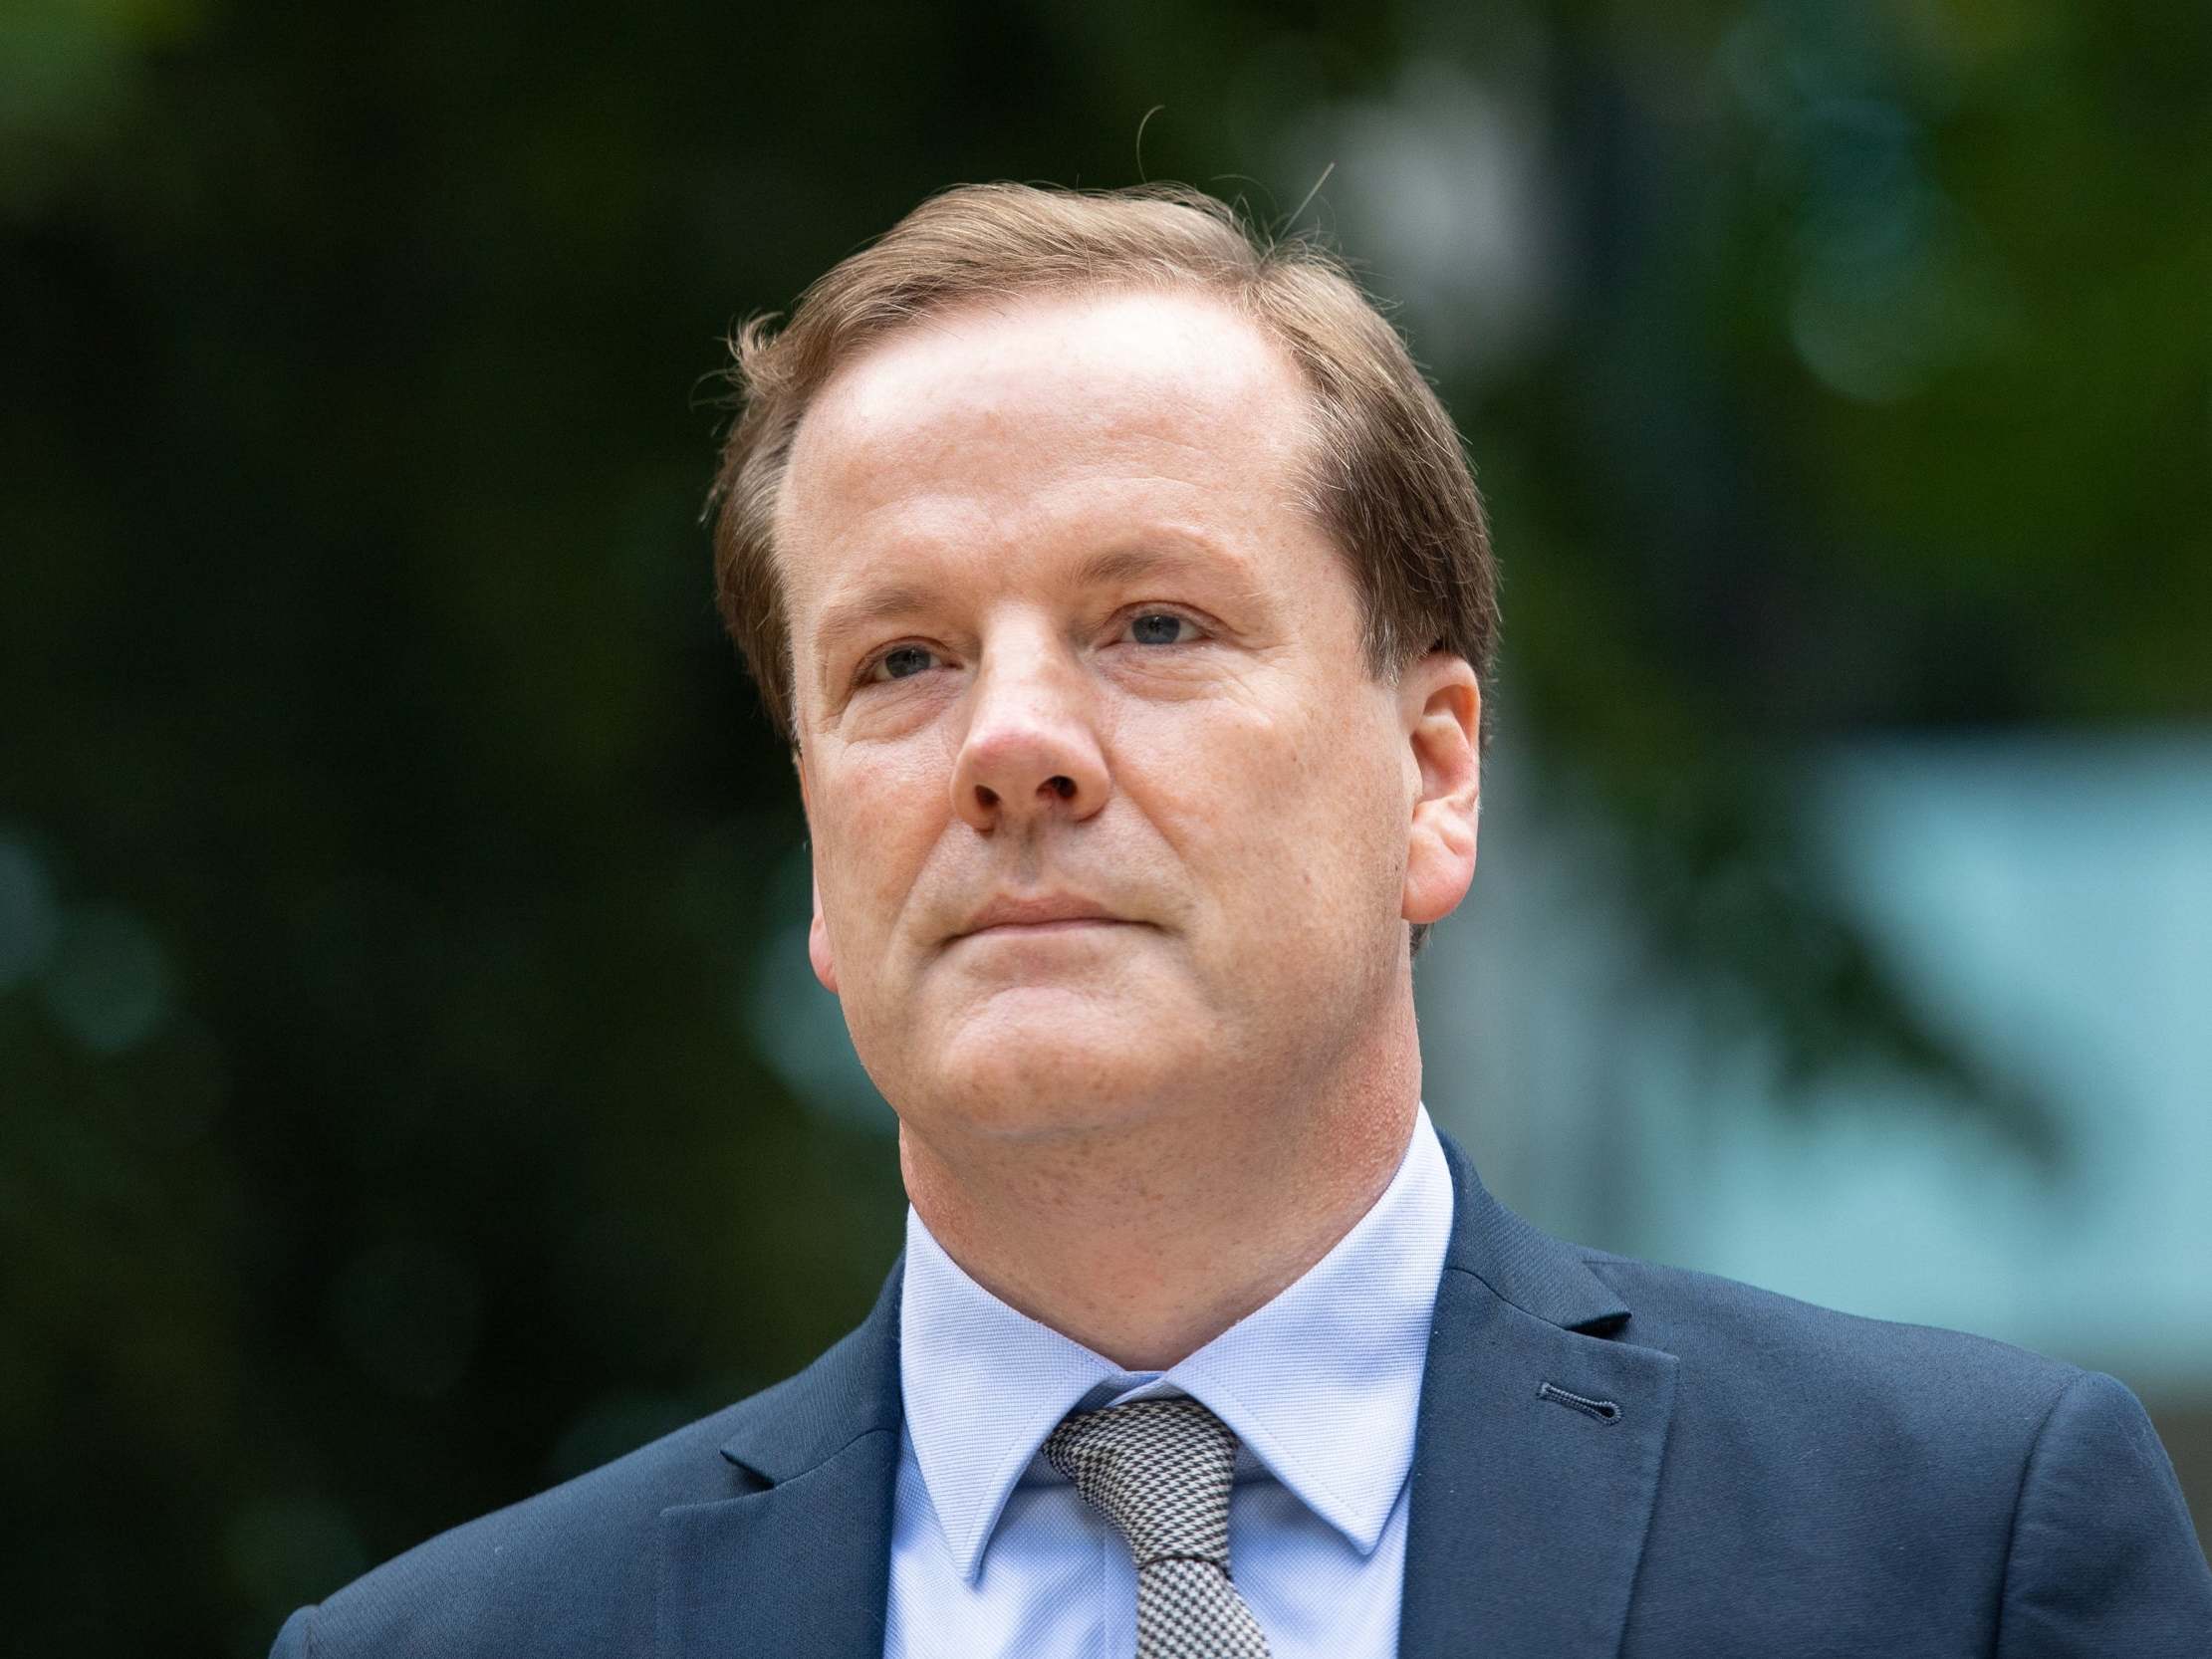 Charlie Elphicke is accused of sexually assault two women